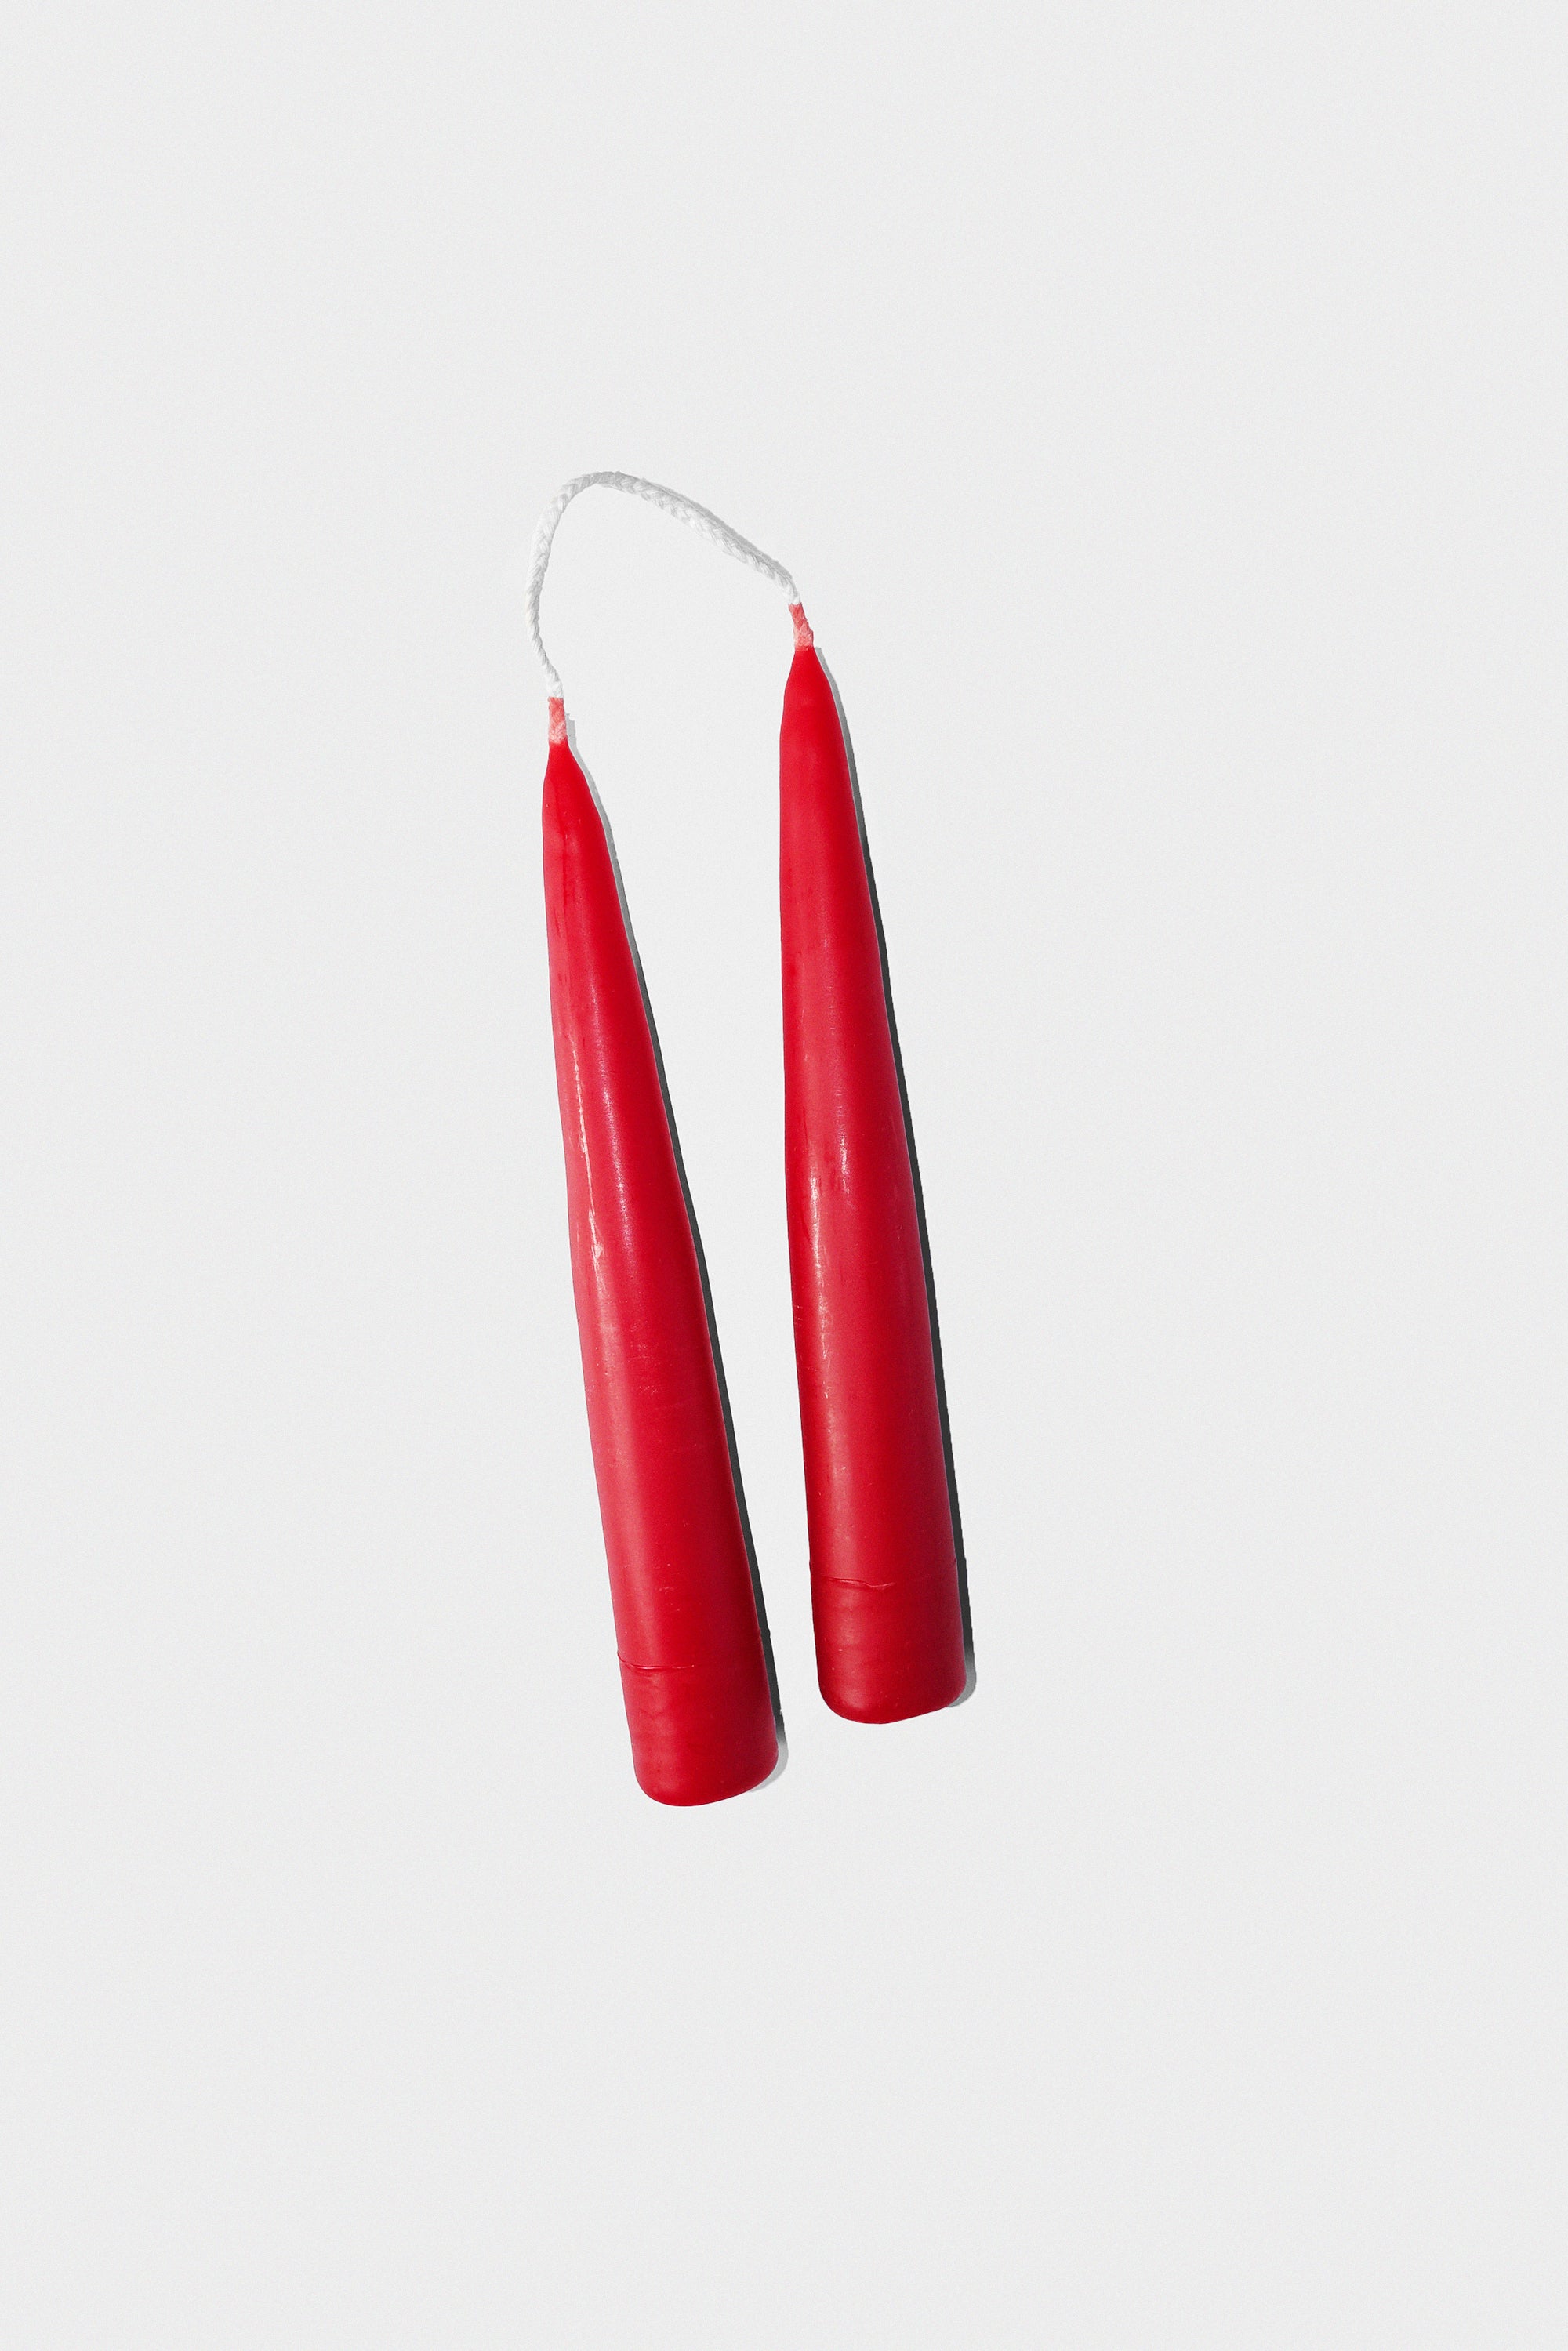 06" Taper Candles in Red Red